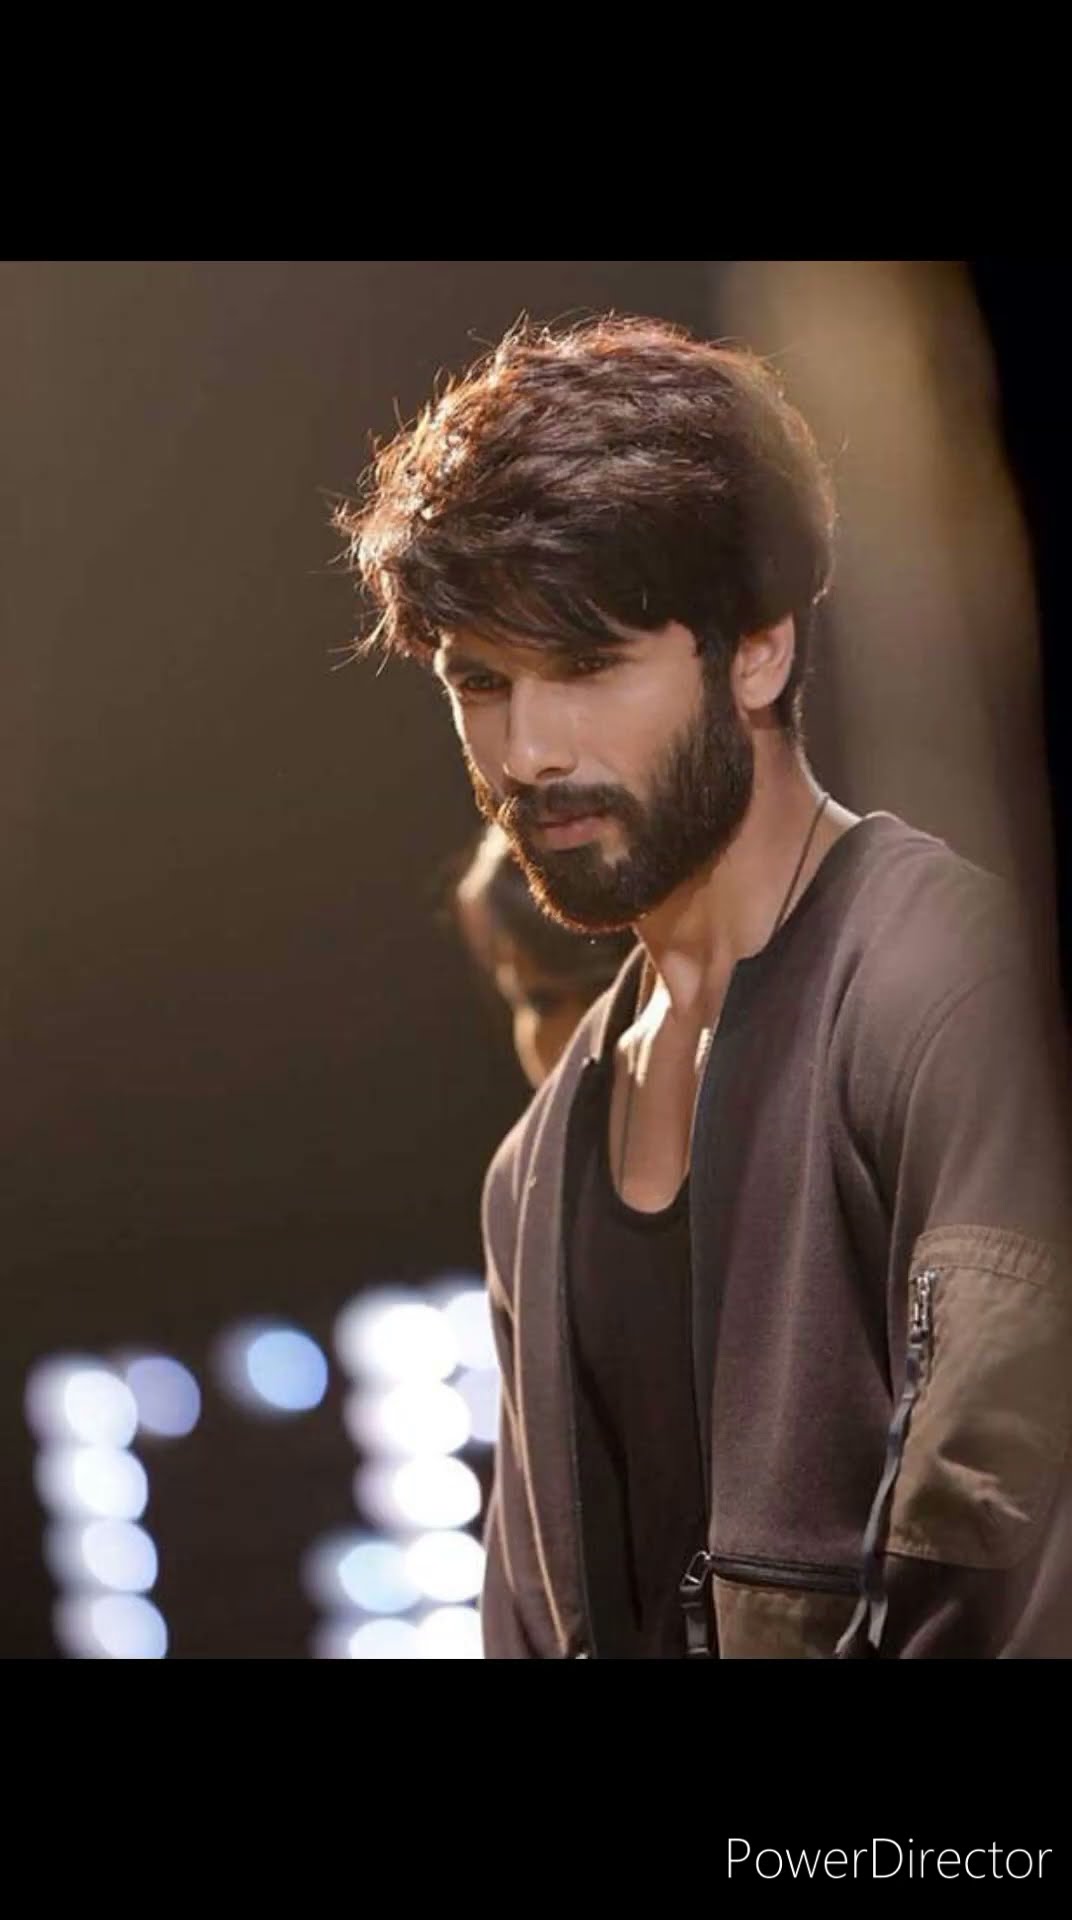 Shahid kapoor's latest pictures in new hairstlye. Looking great! :  r/BollyBlindsNGossip